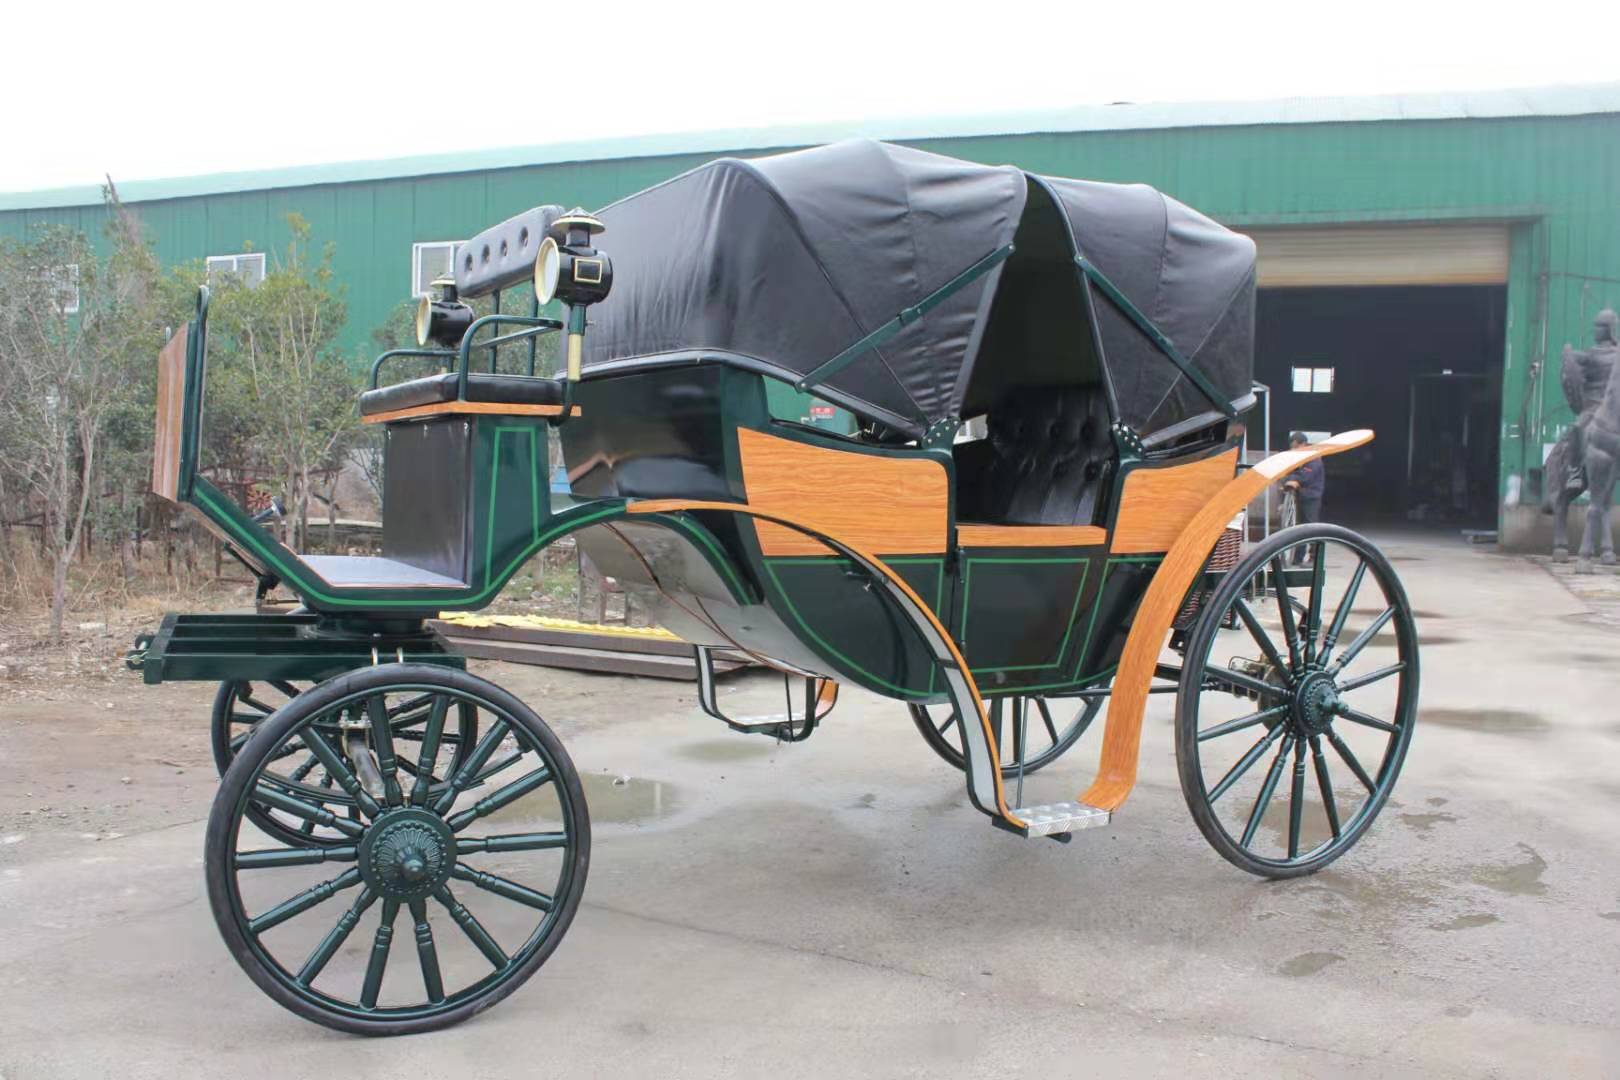 Traditional horse carriage with open roof, inspired by the iconic American chuck wago